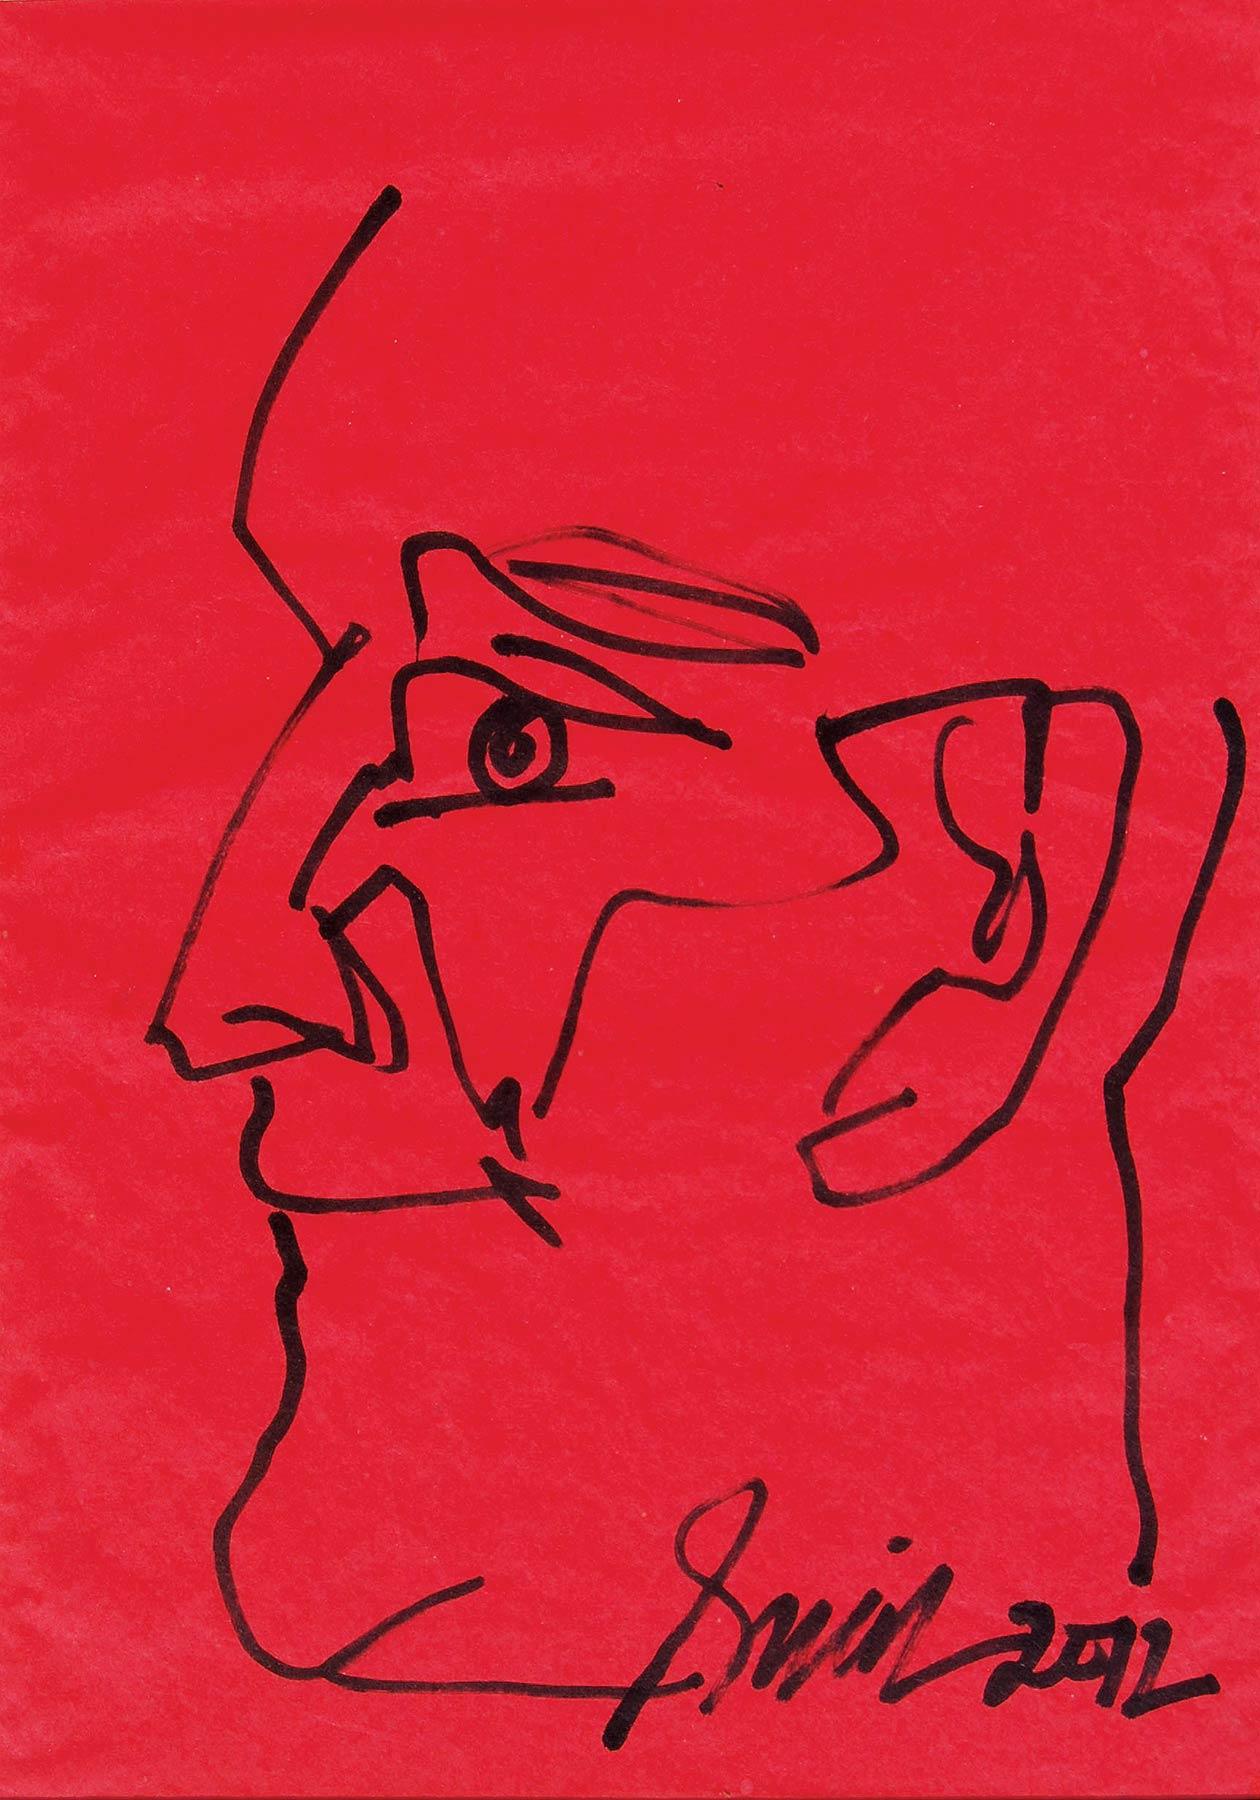 Sunil Das Figurative Painting - Head, Pen & Ink on Coloured Paper, Red, Black by Indian Artist "In Stock"